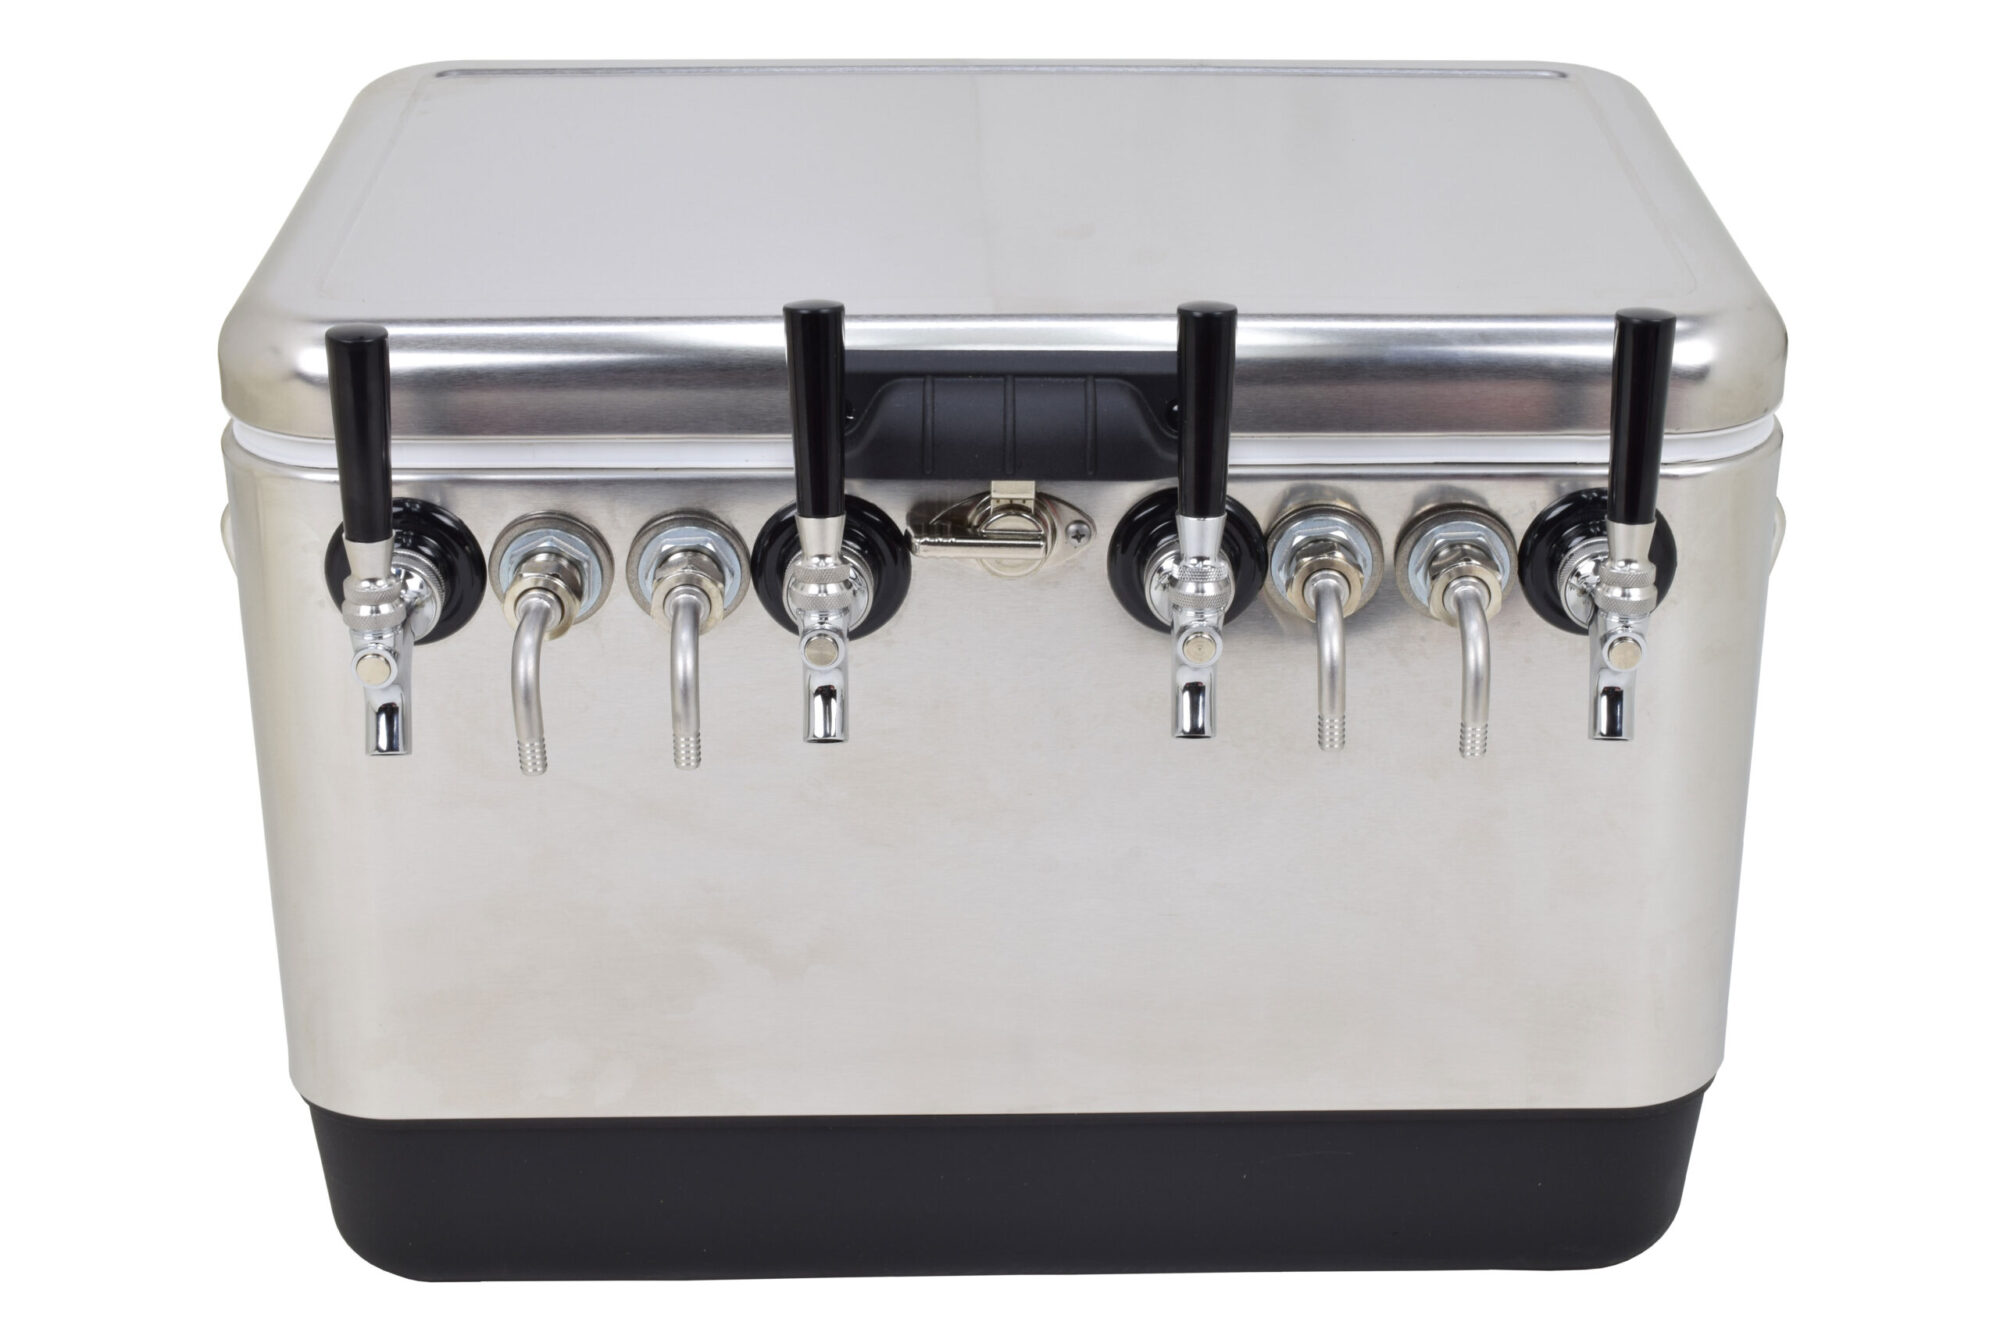 4 product Coil Box - Bartender Style in a Metal 54qt